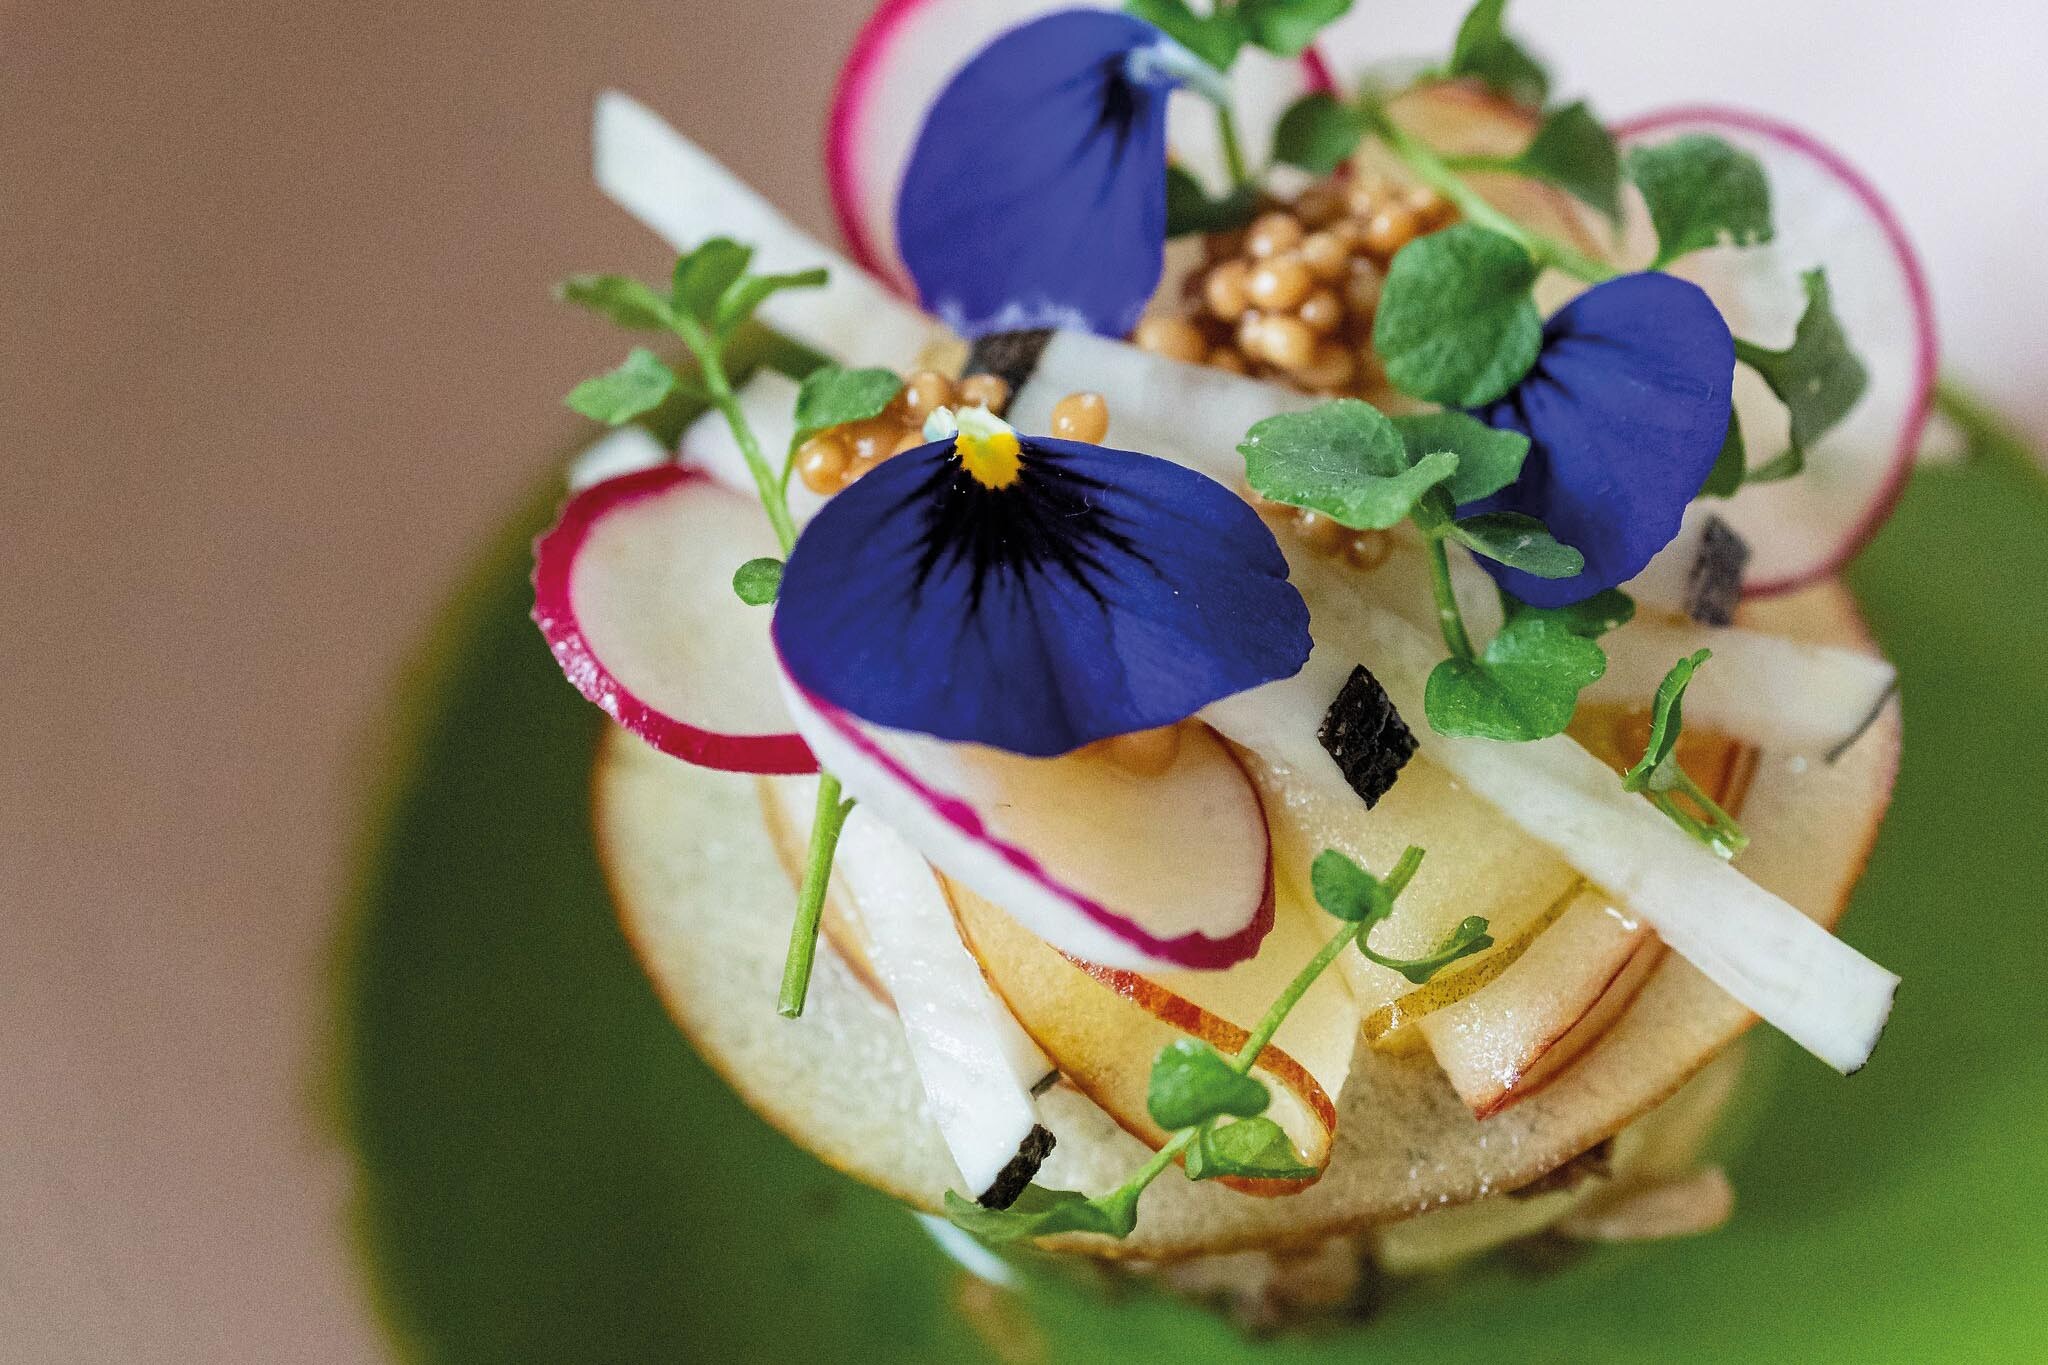 Freshly prepared dish with apple, radishes and flower petals